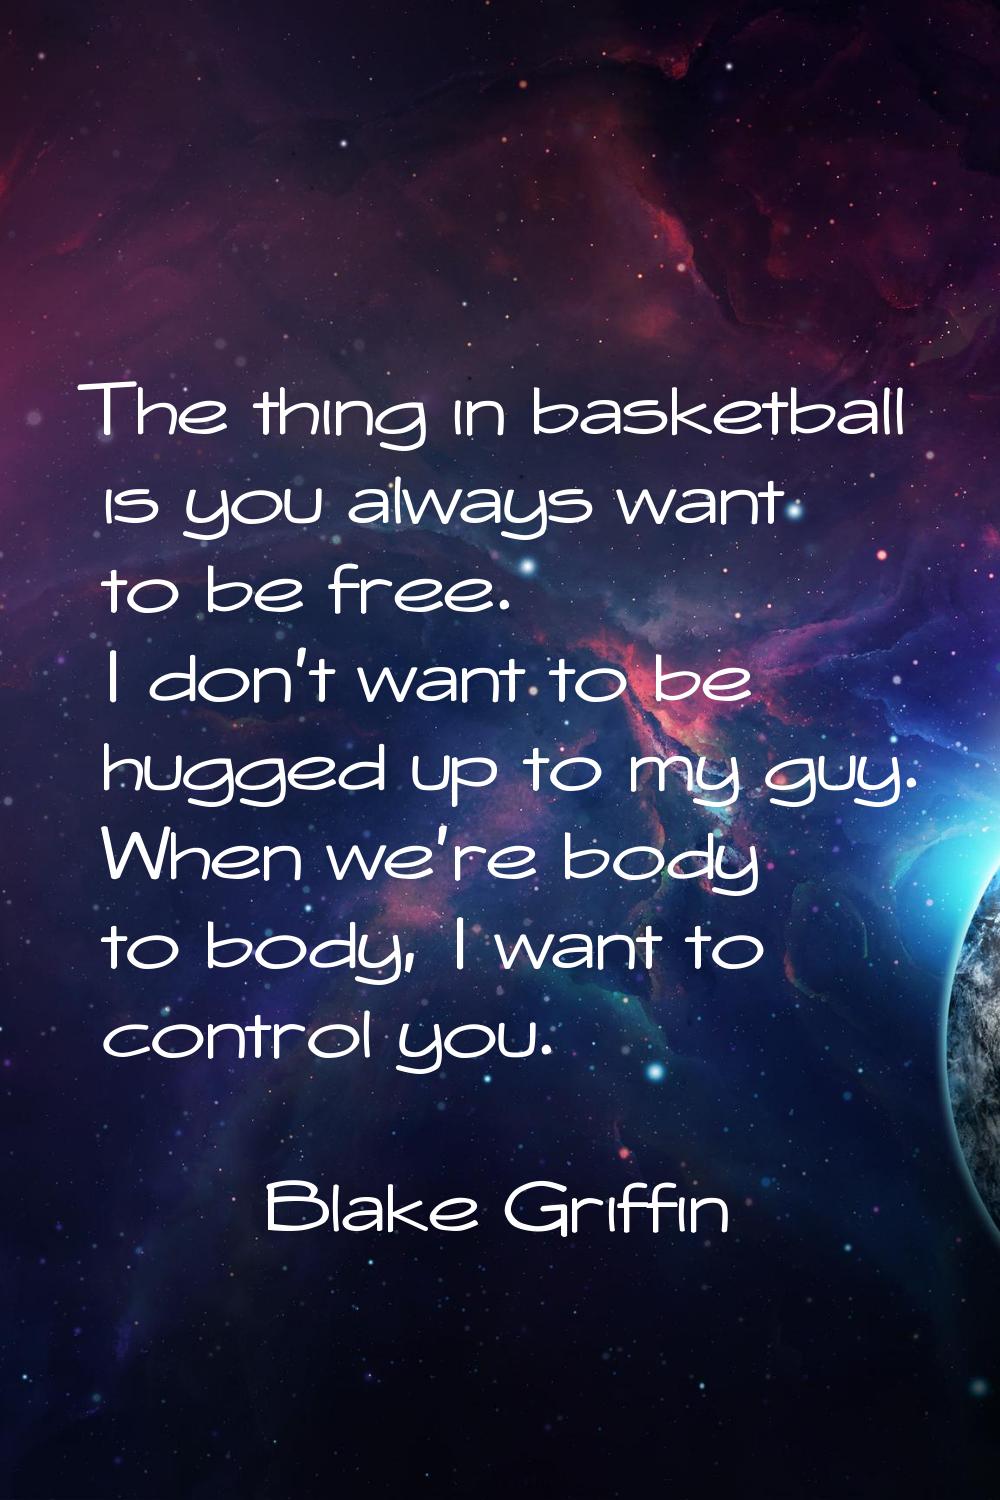 The thing in basketball is you always want to be free. I don't want to be hugged up to my guy. When